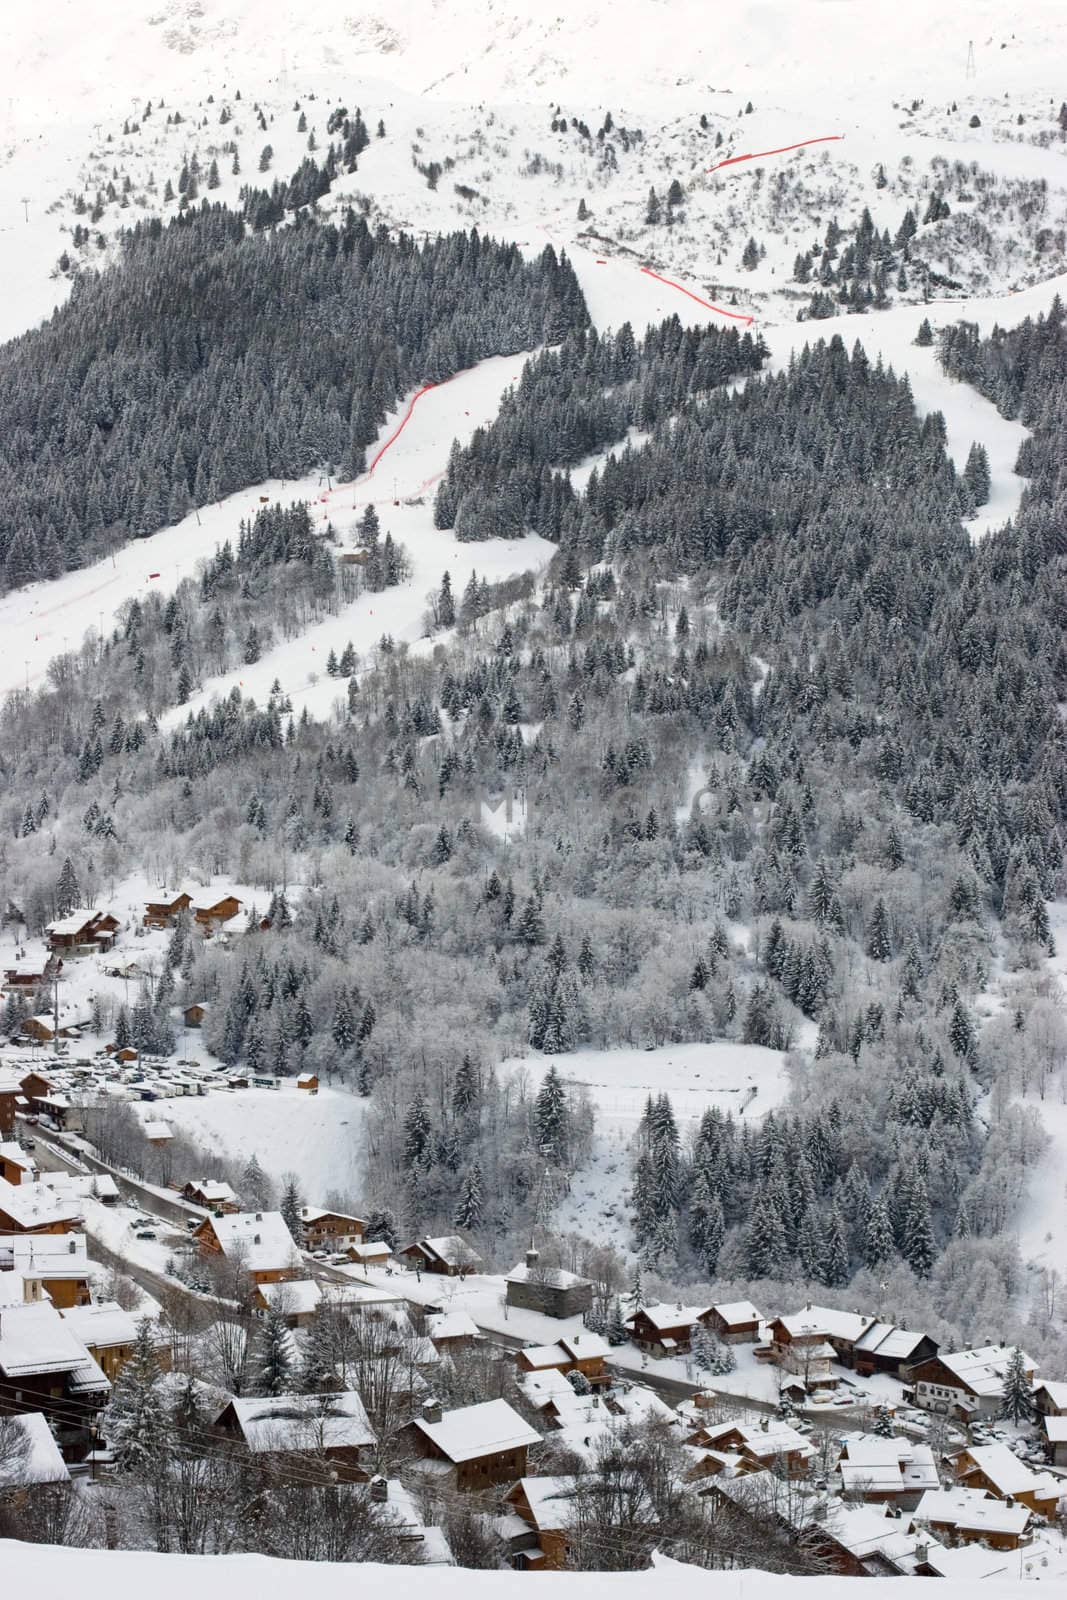 A view of the ski resort by naumoid